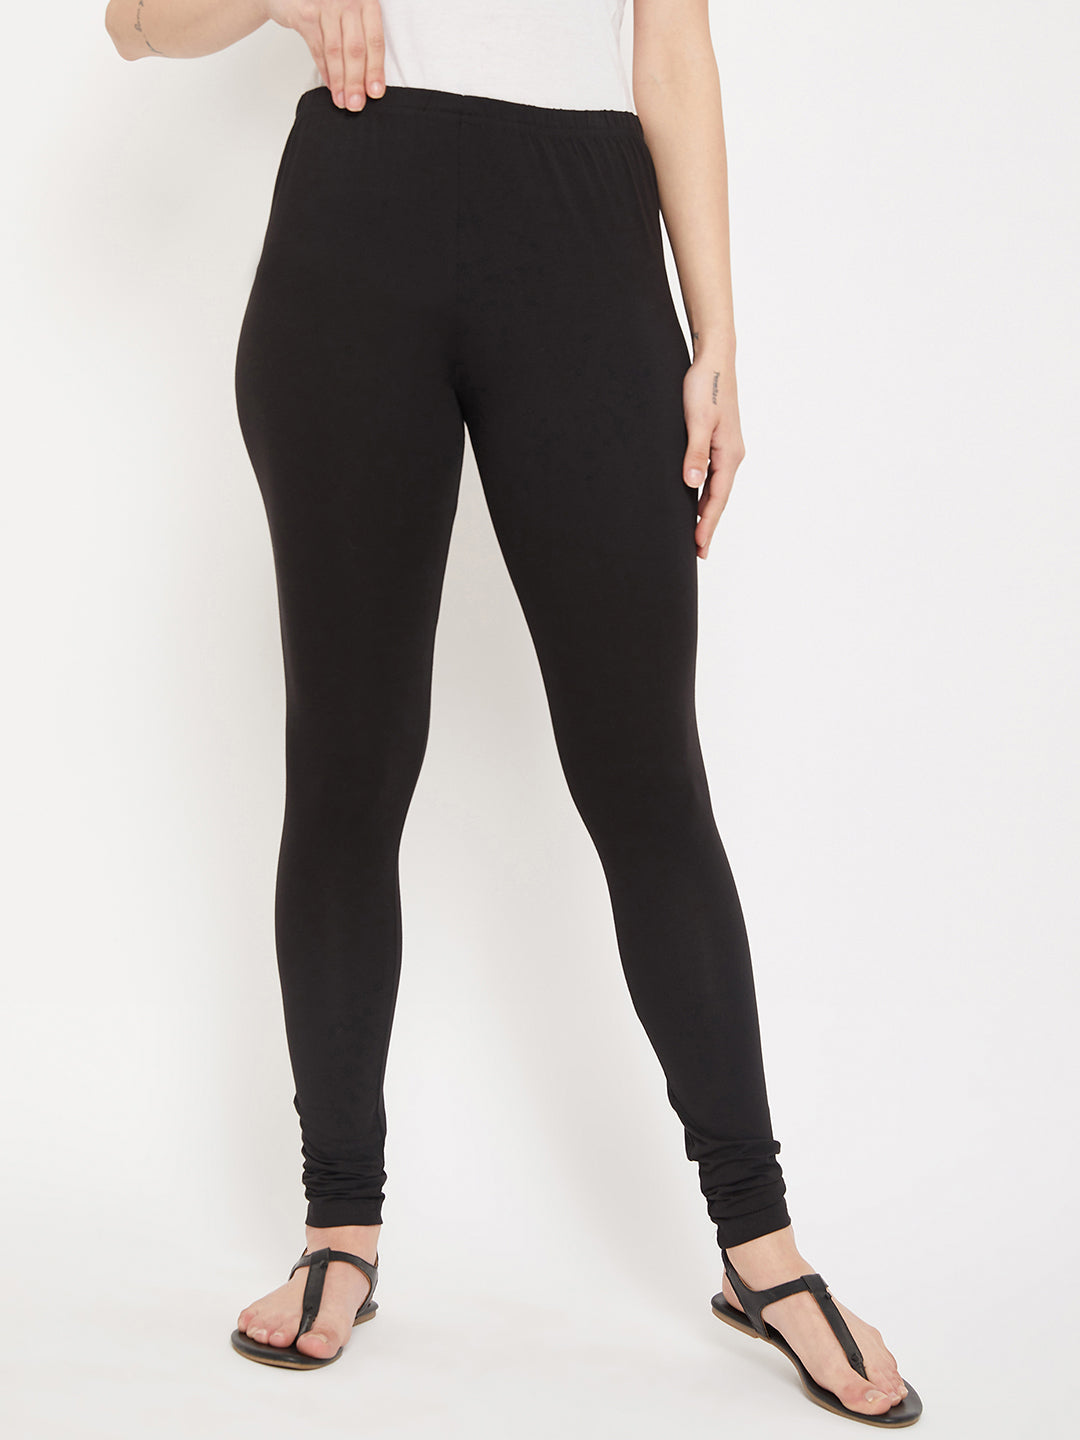 Buy Stylish Xxl Leggings Collection At Best Prices Online